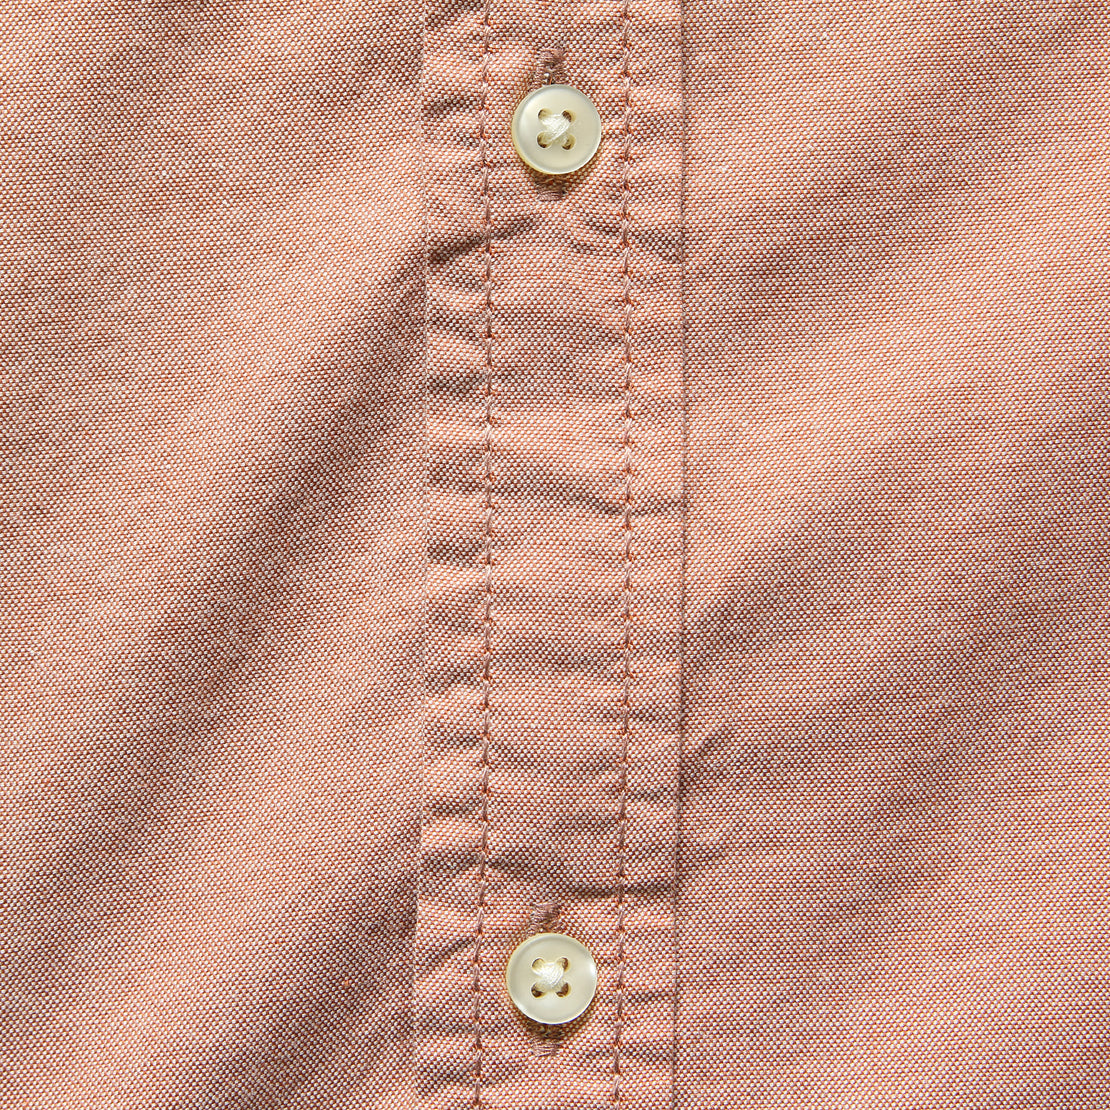 Oxford Shirt - Terra Cotta - Life After Denim - STAG Provisions - Tops - S/S Woven - Solid